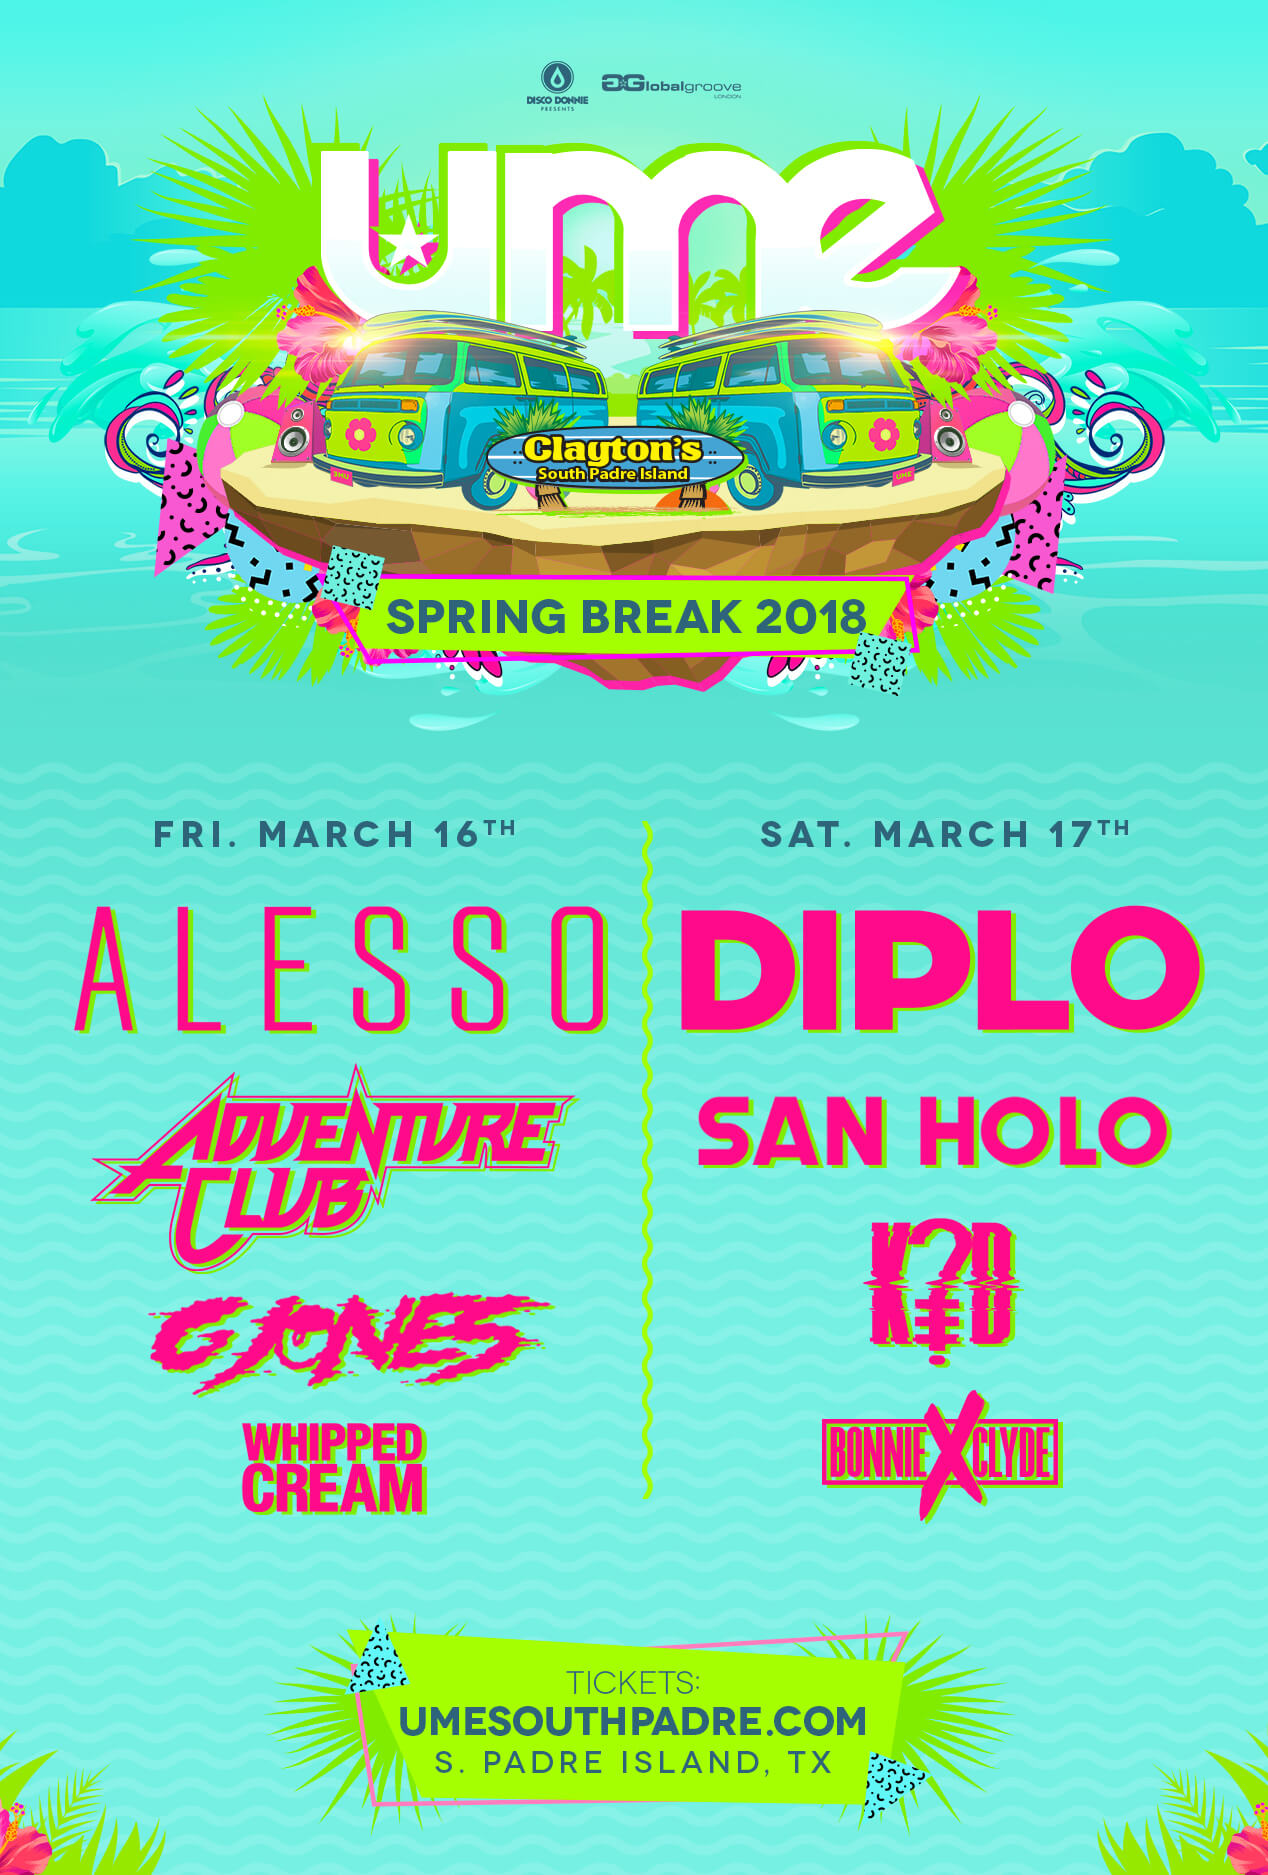 Festival UME Spring Break South Padre Island, Tex. tickets and